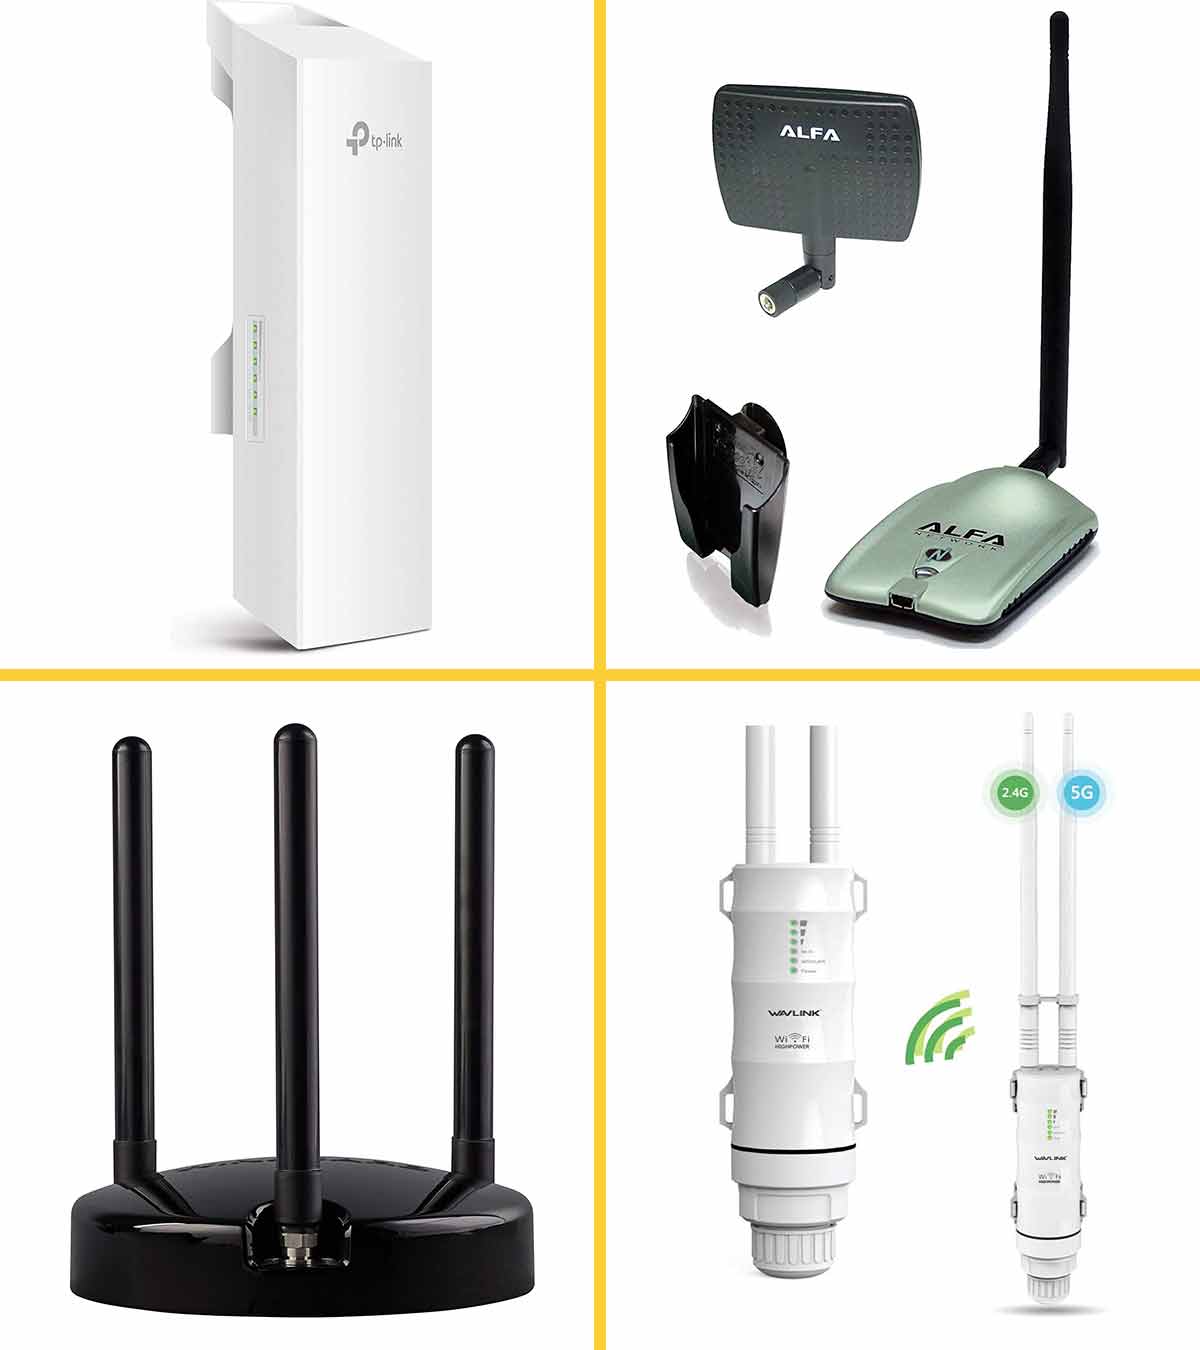 15 Best Outdoor Wi-Fi Extenders For Long-Range Access In 2023